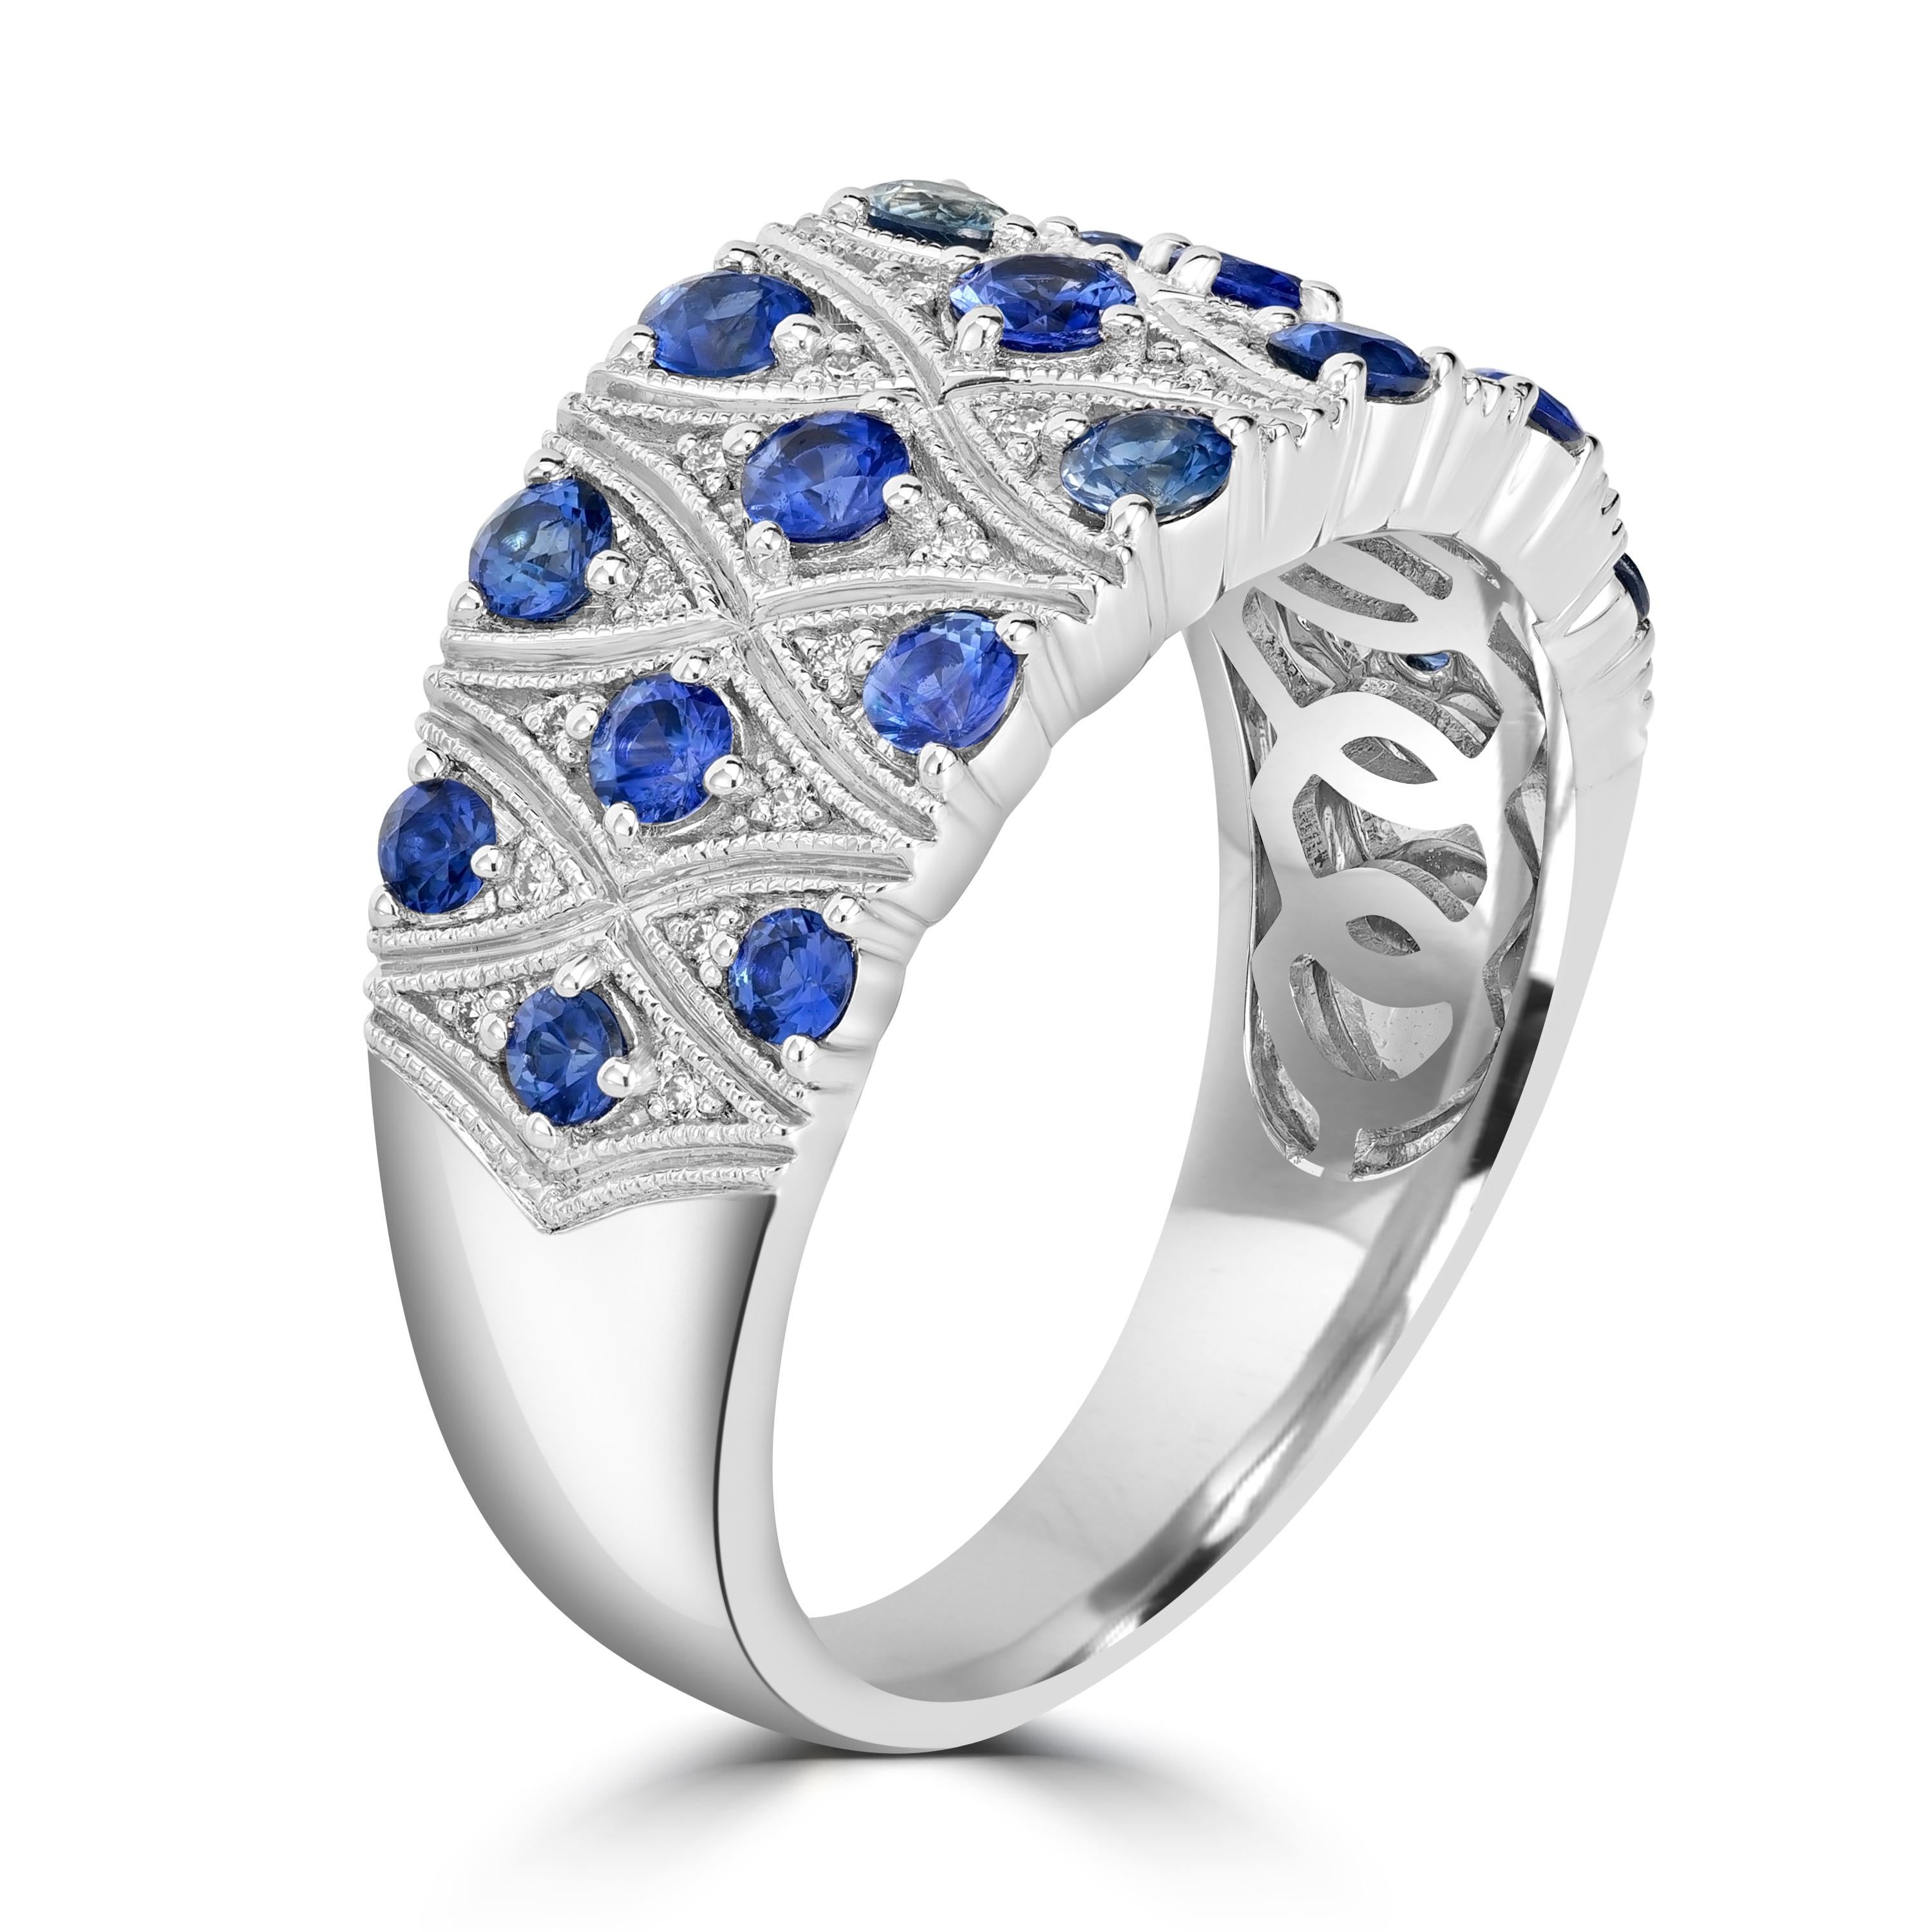 Introducing our enchanting 1.06 Carats Sapphire and Diamond Cluster Ring, a dazzling union of elegance and brilliance. This exquisite ring features a stunning sapphires surrounded by a cluster of sparkling diamonds, creating a piece that exudes